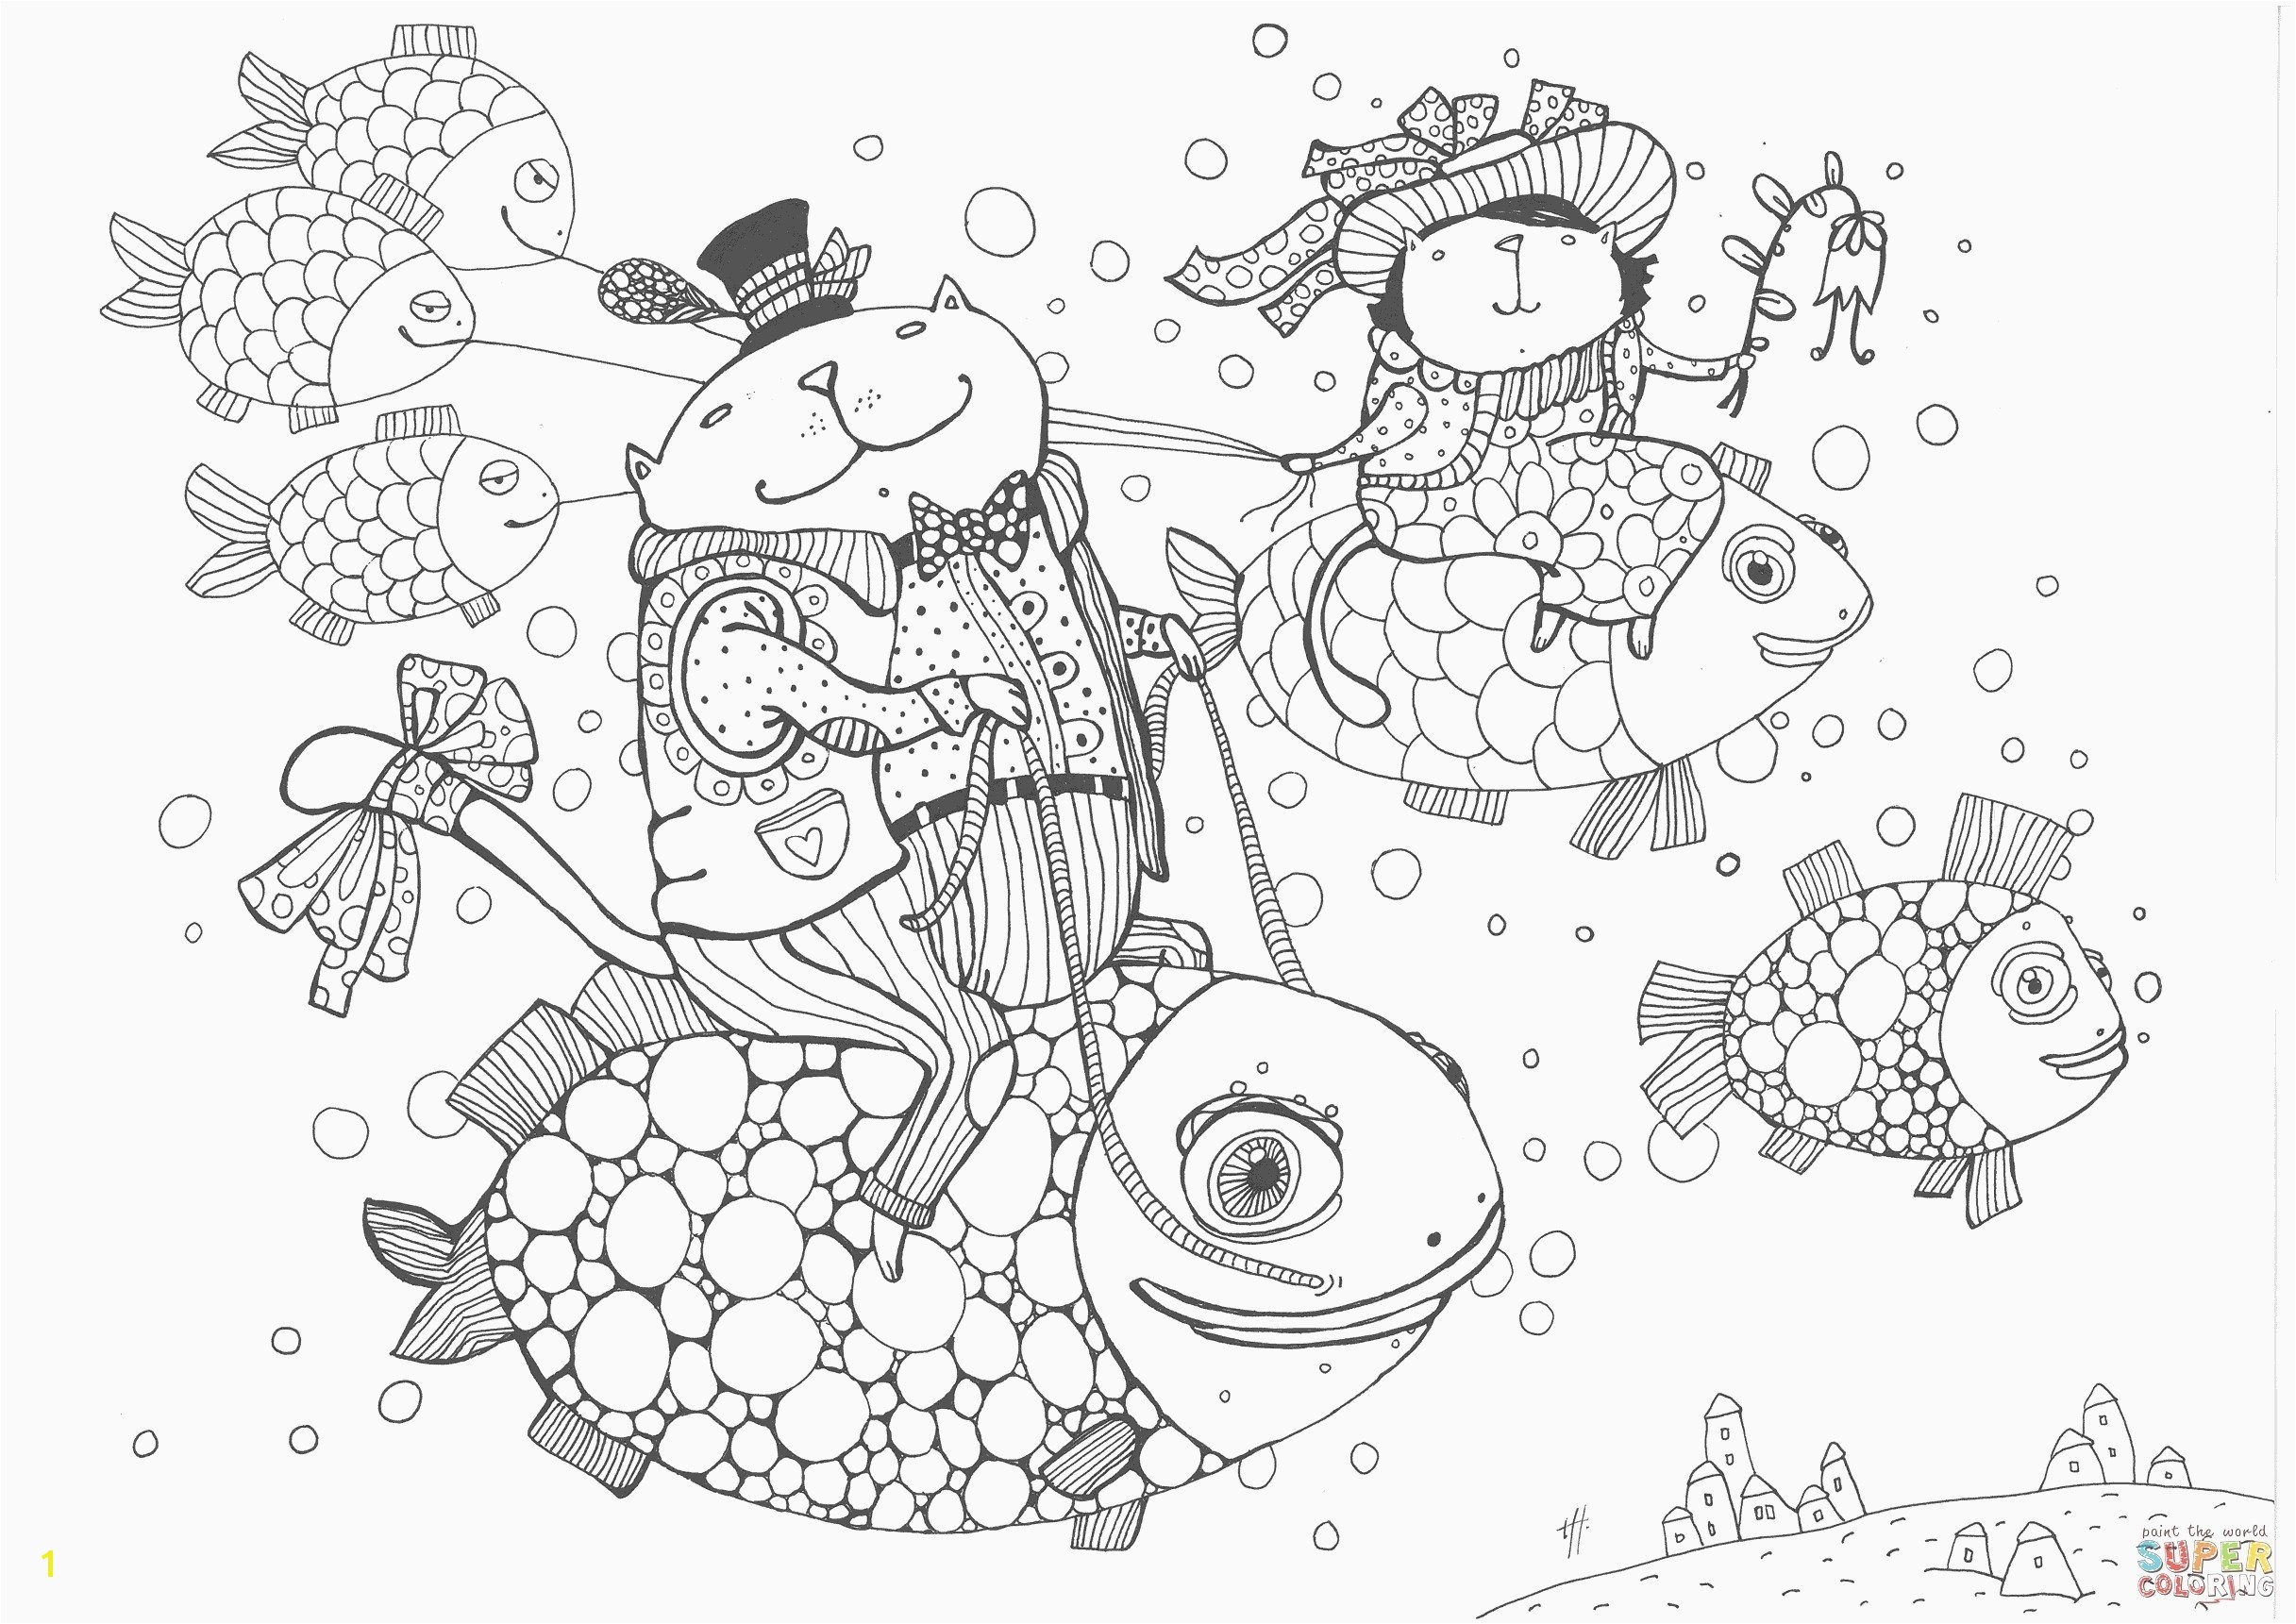 Get Well soon Coloring Pages Elegant Adult Halloween Coloring Pages Elegant Halloween Coloring Pages Free